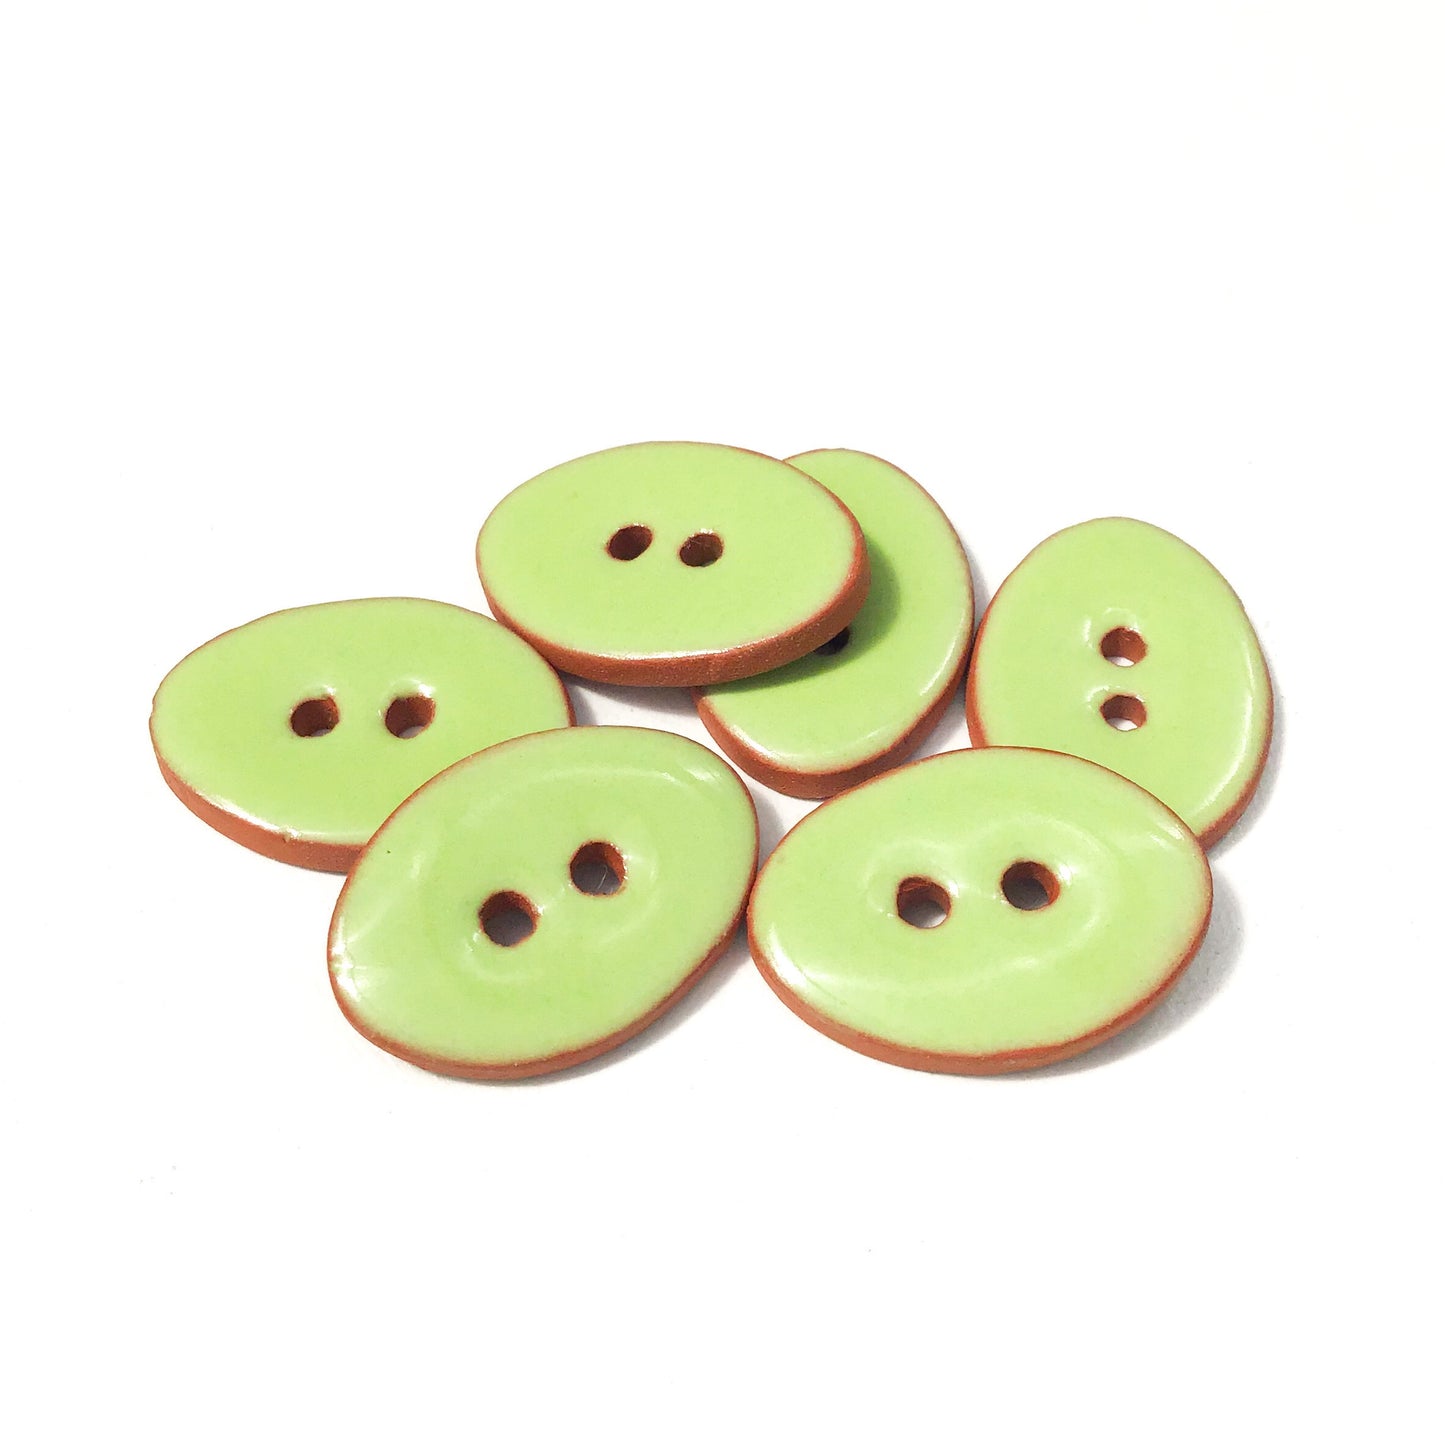 Lime Green Oval Clay Buttons - 5/8" x 7/8" - 6 Pack (ws-124)